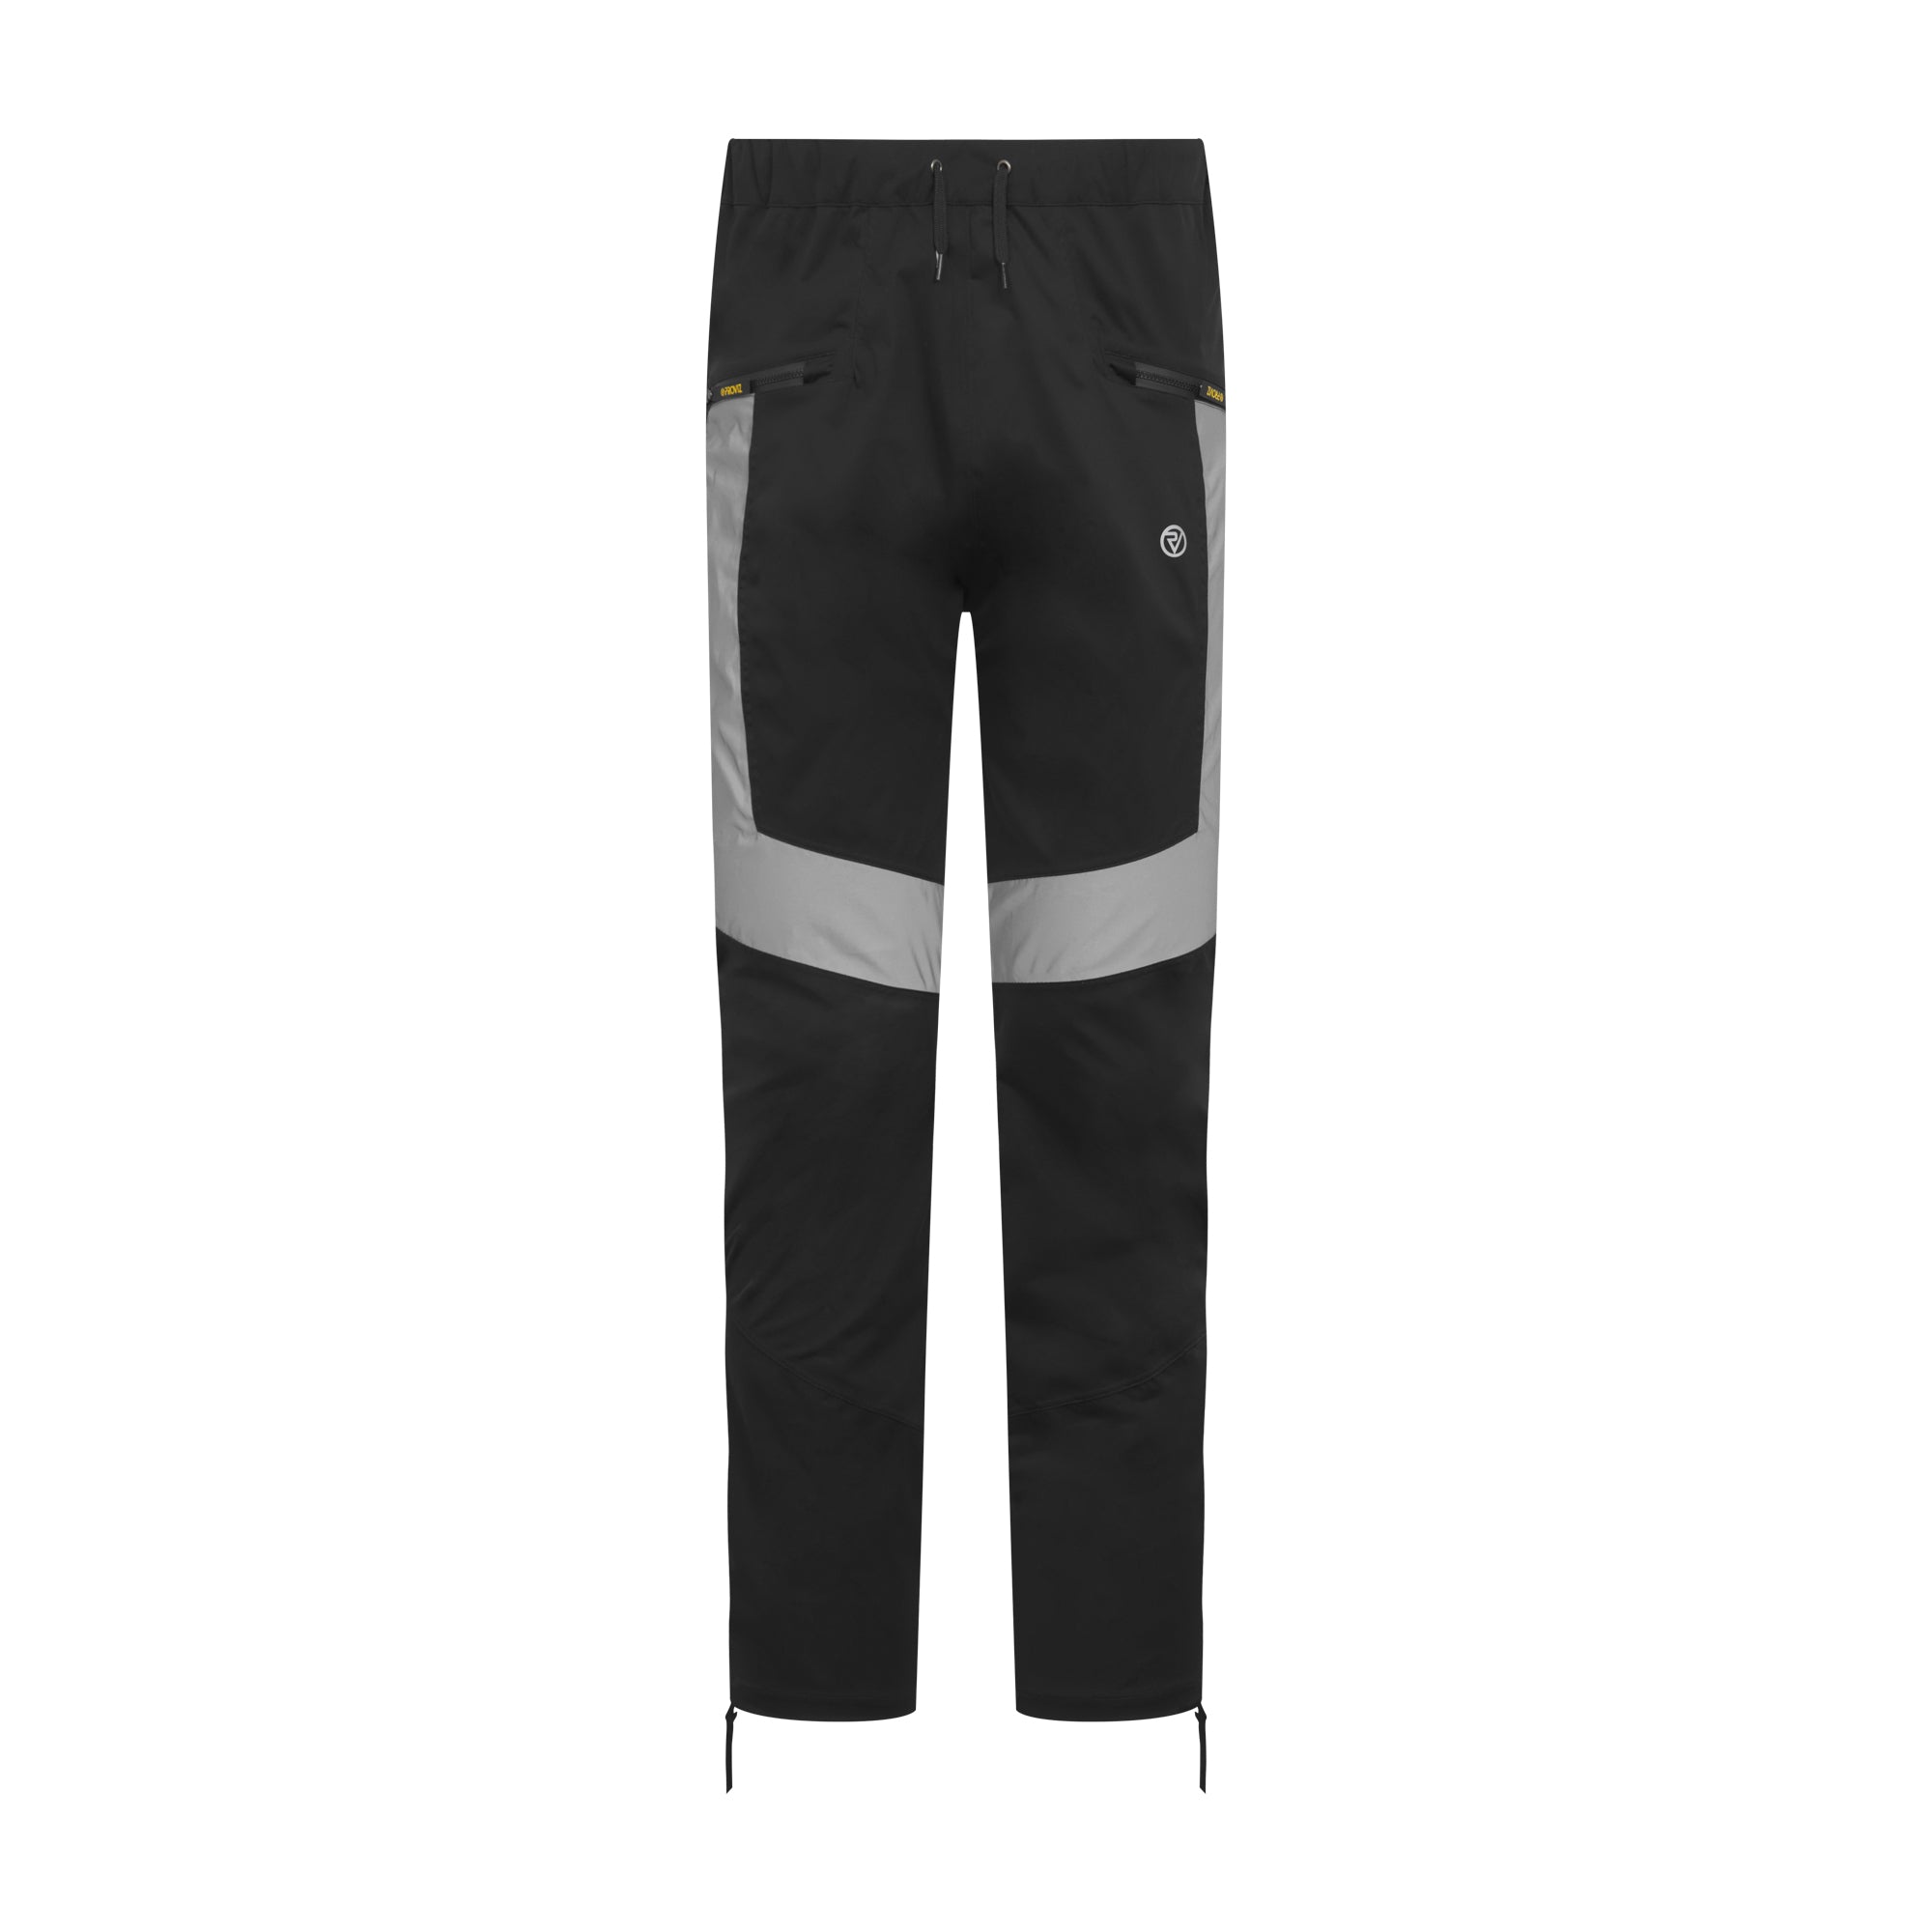 Men’s Tailored Waterproof Cycling Trousers product